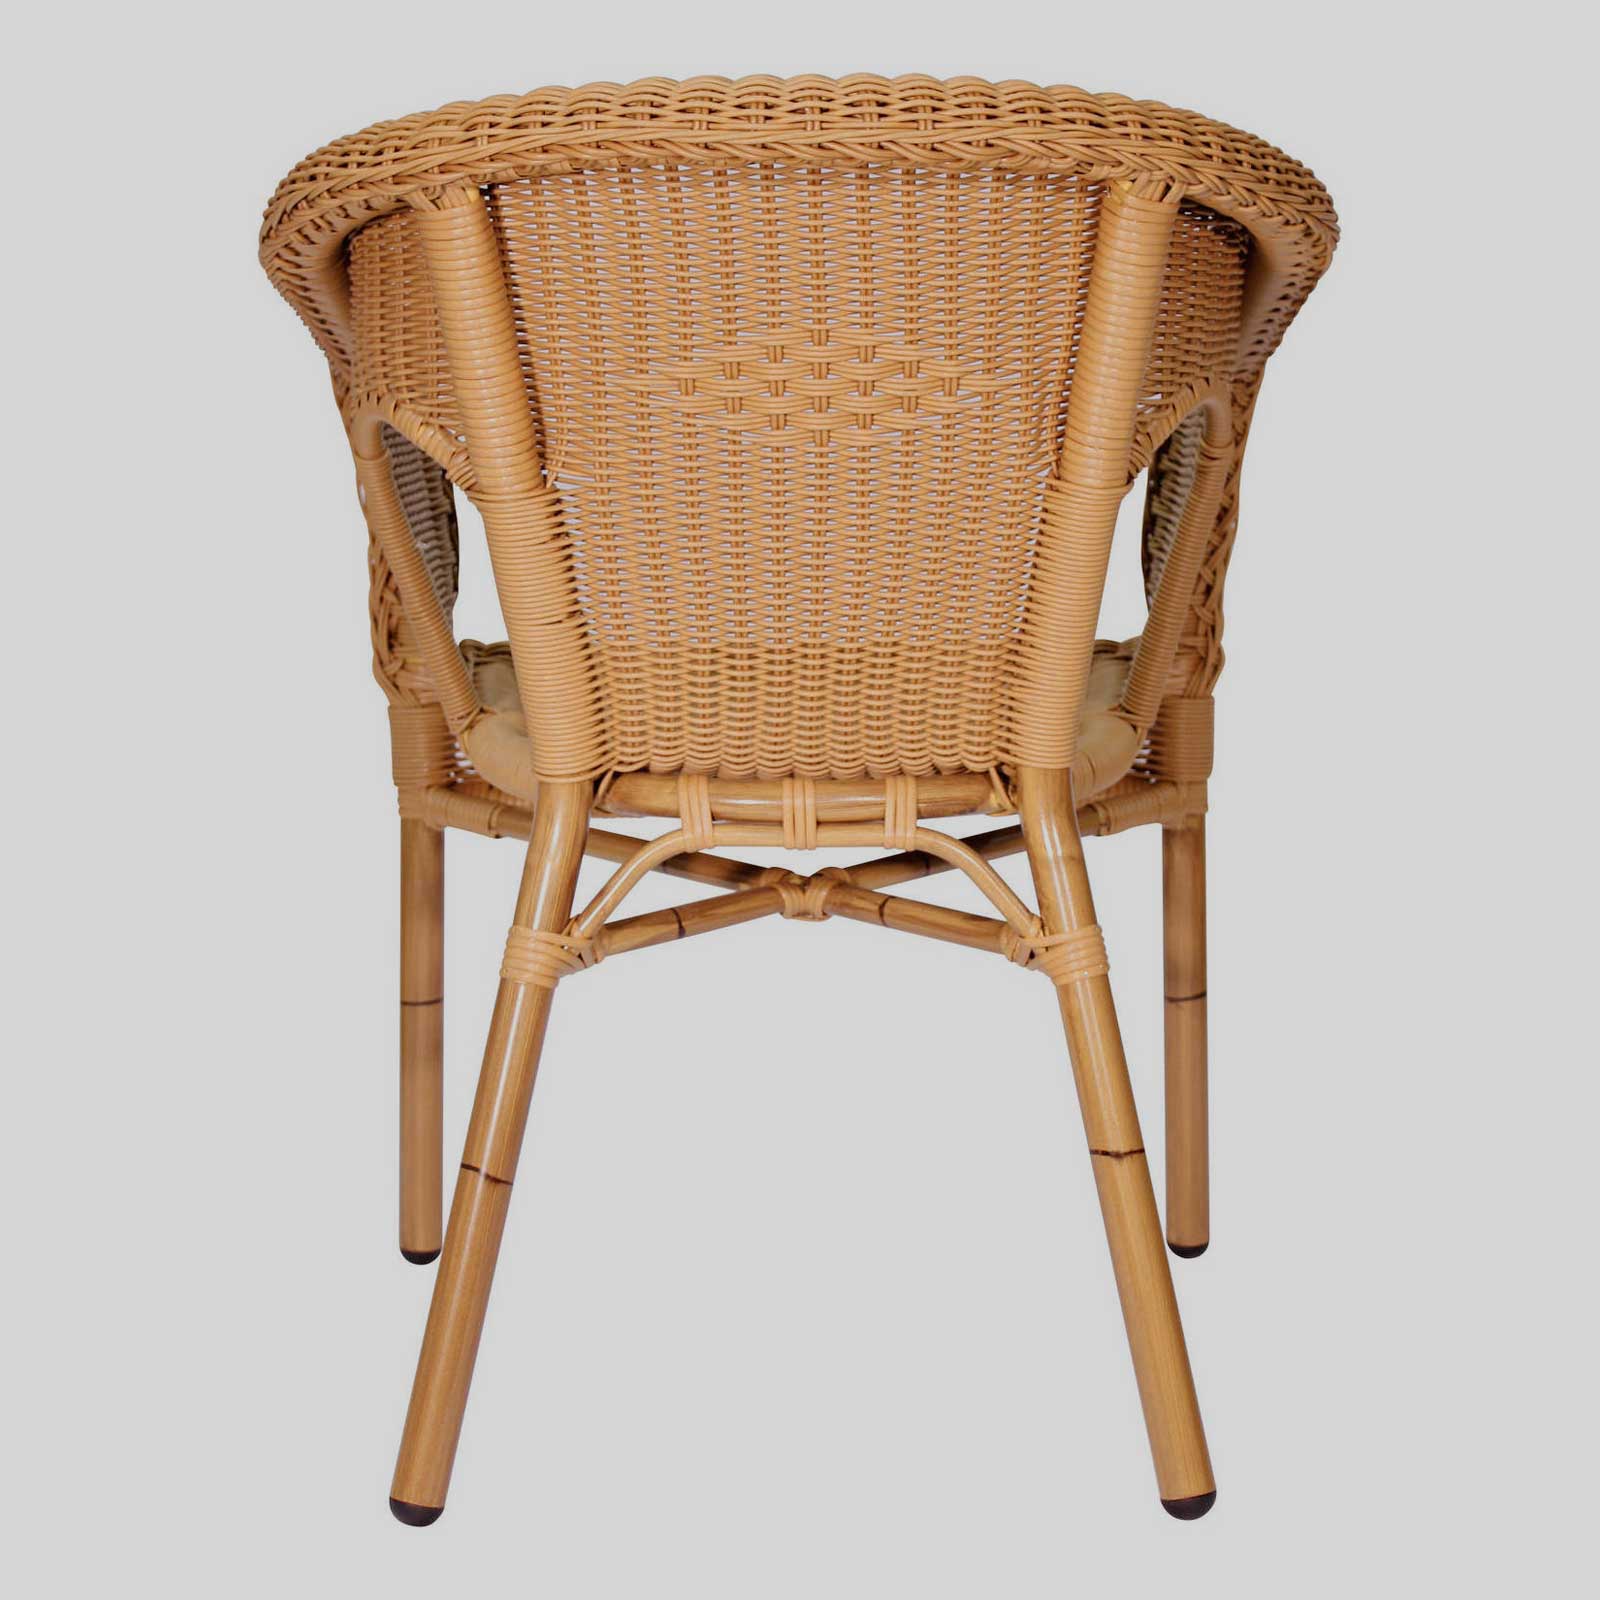 wicker table and chair